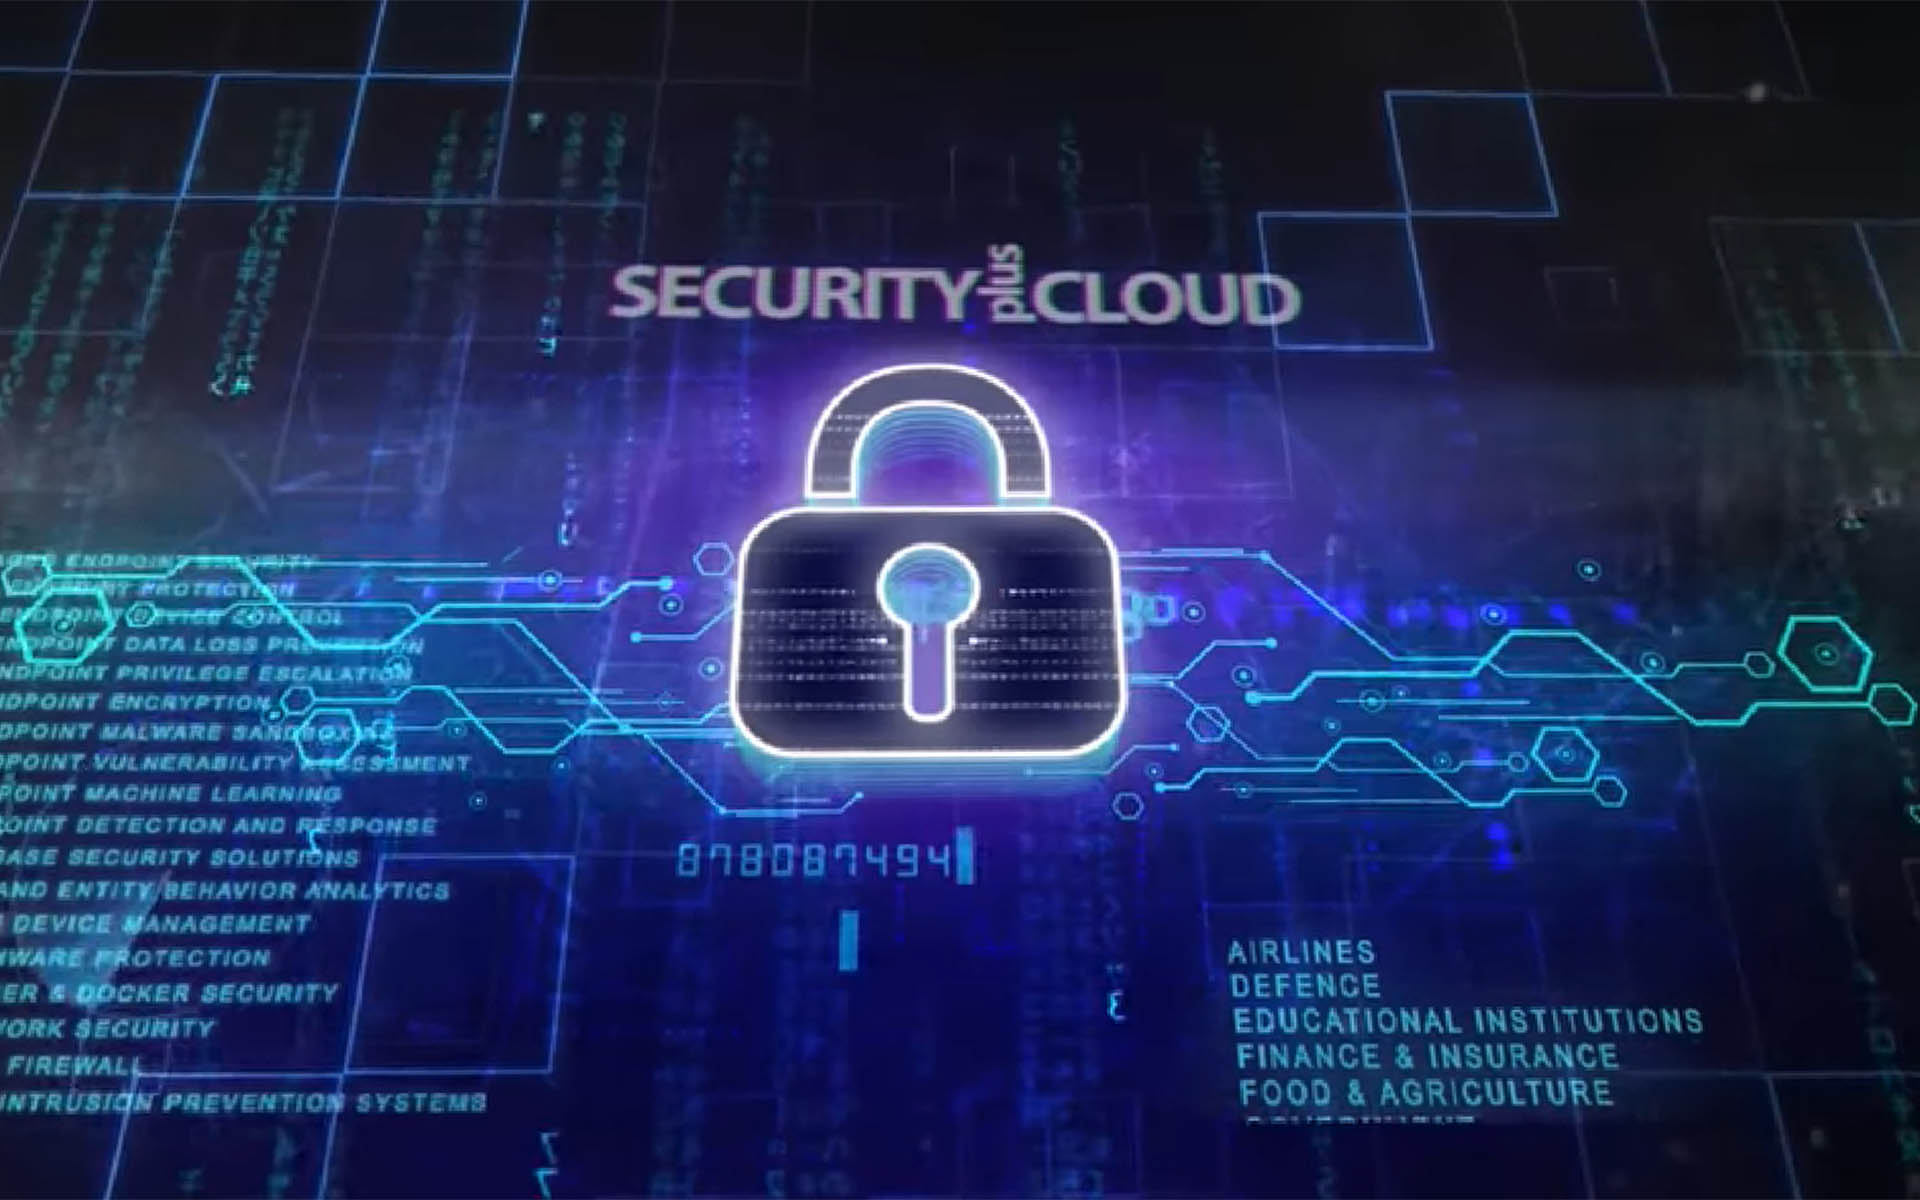 SecurityPlusCloud Rocks Cyber Security Industry With Announcement of World’s First Cyber Security Based ICO